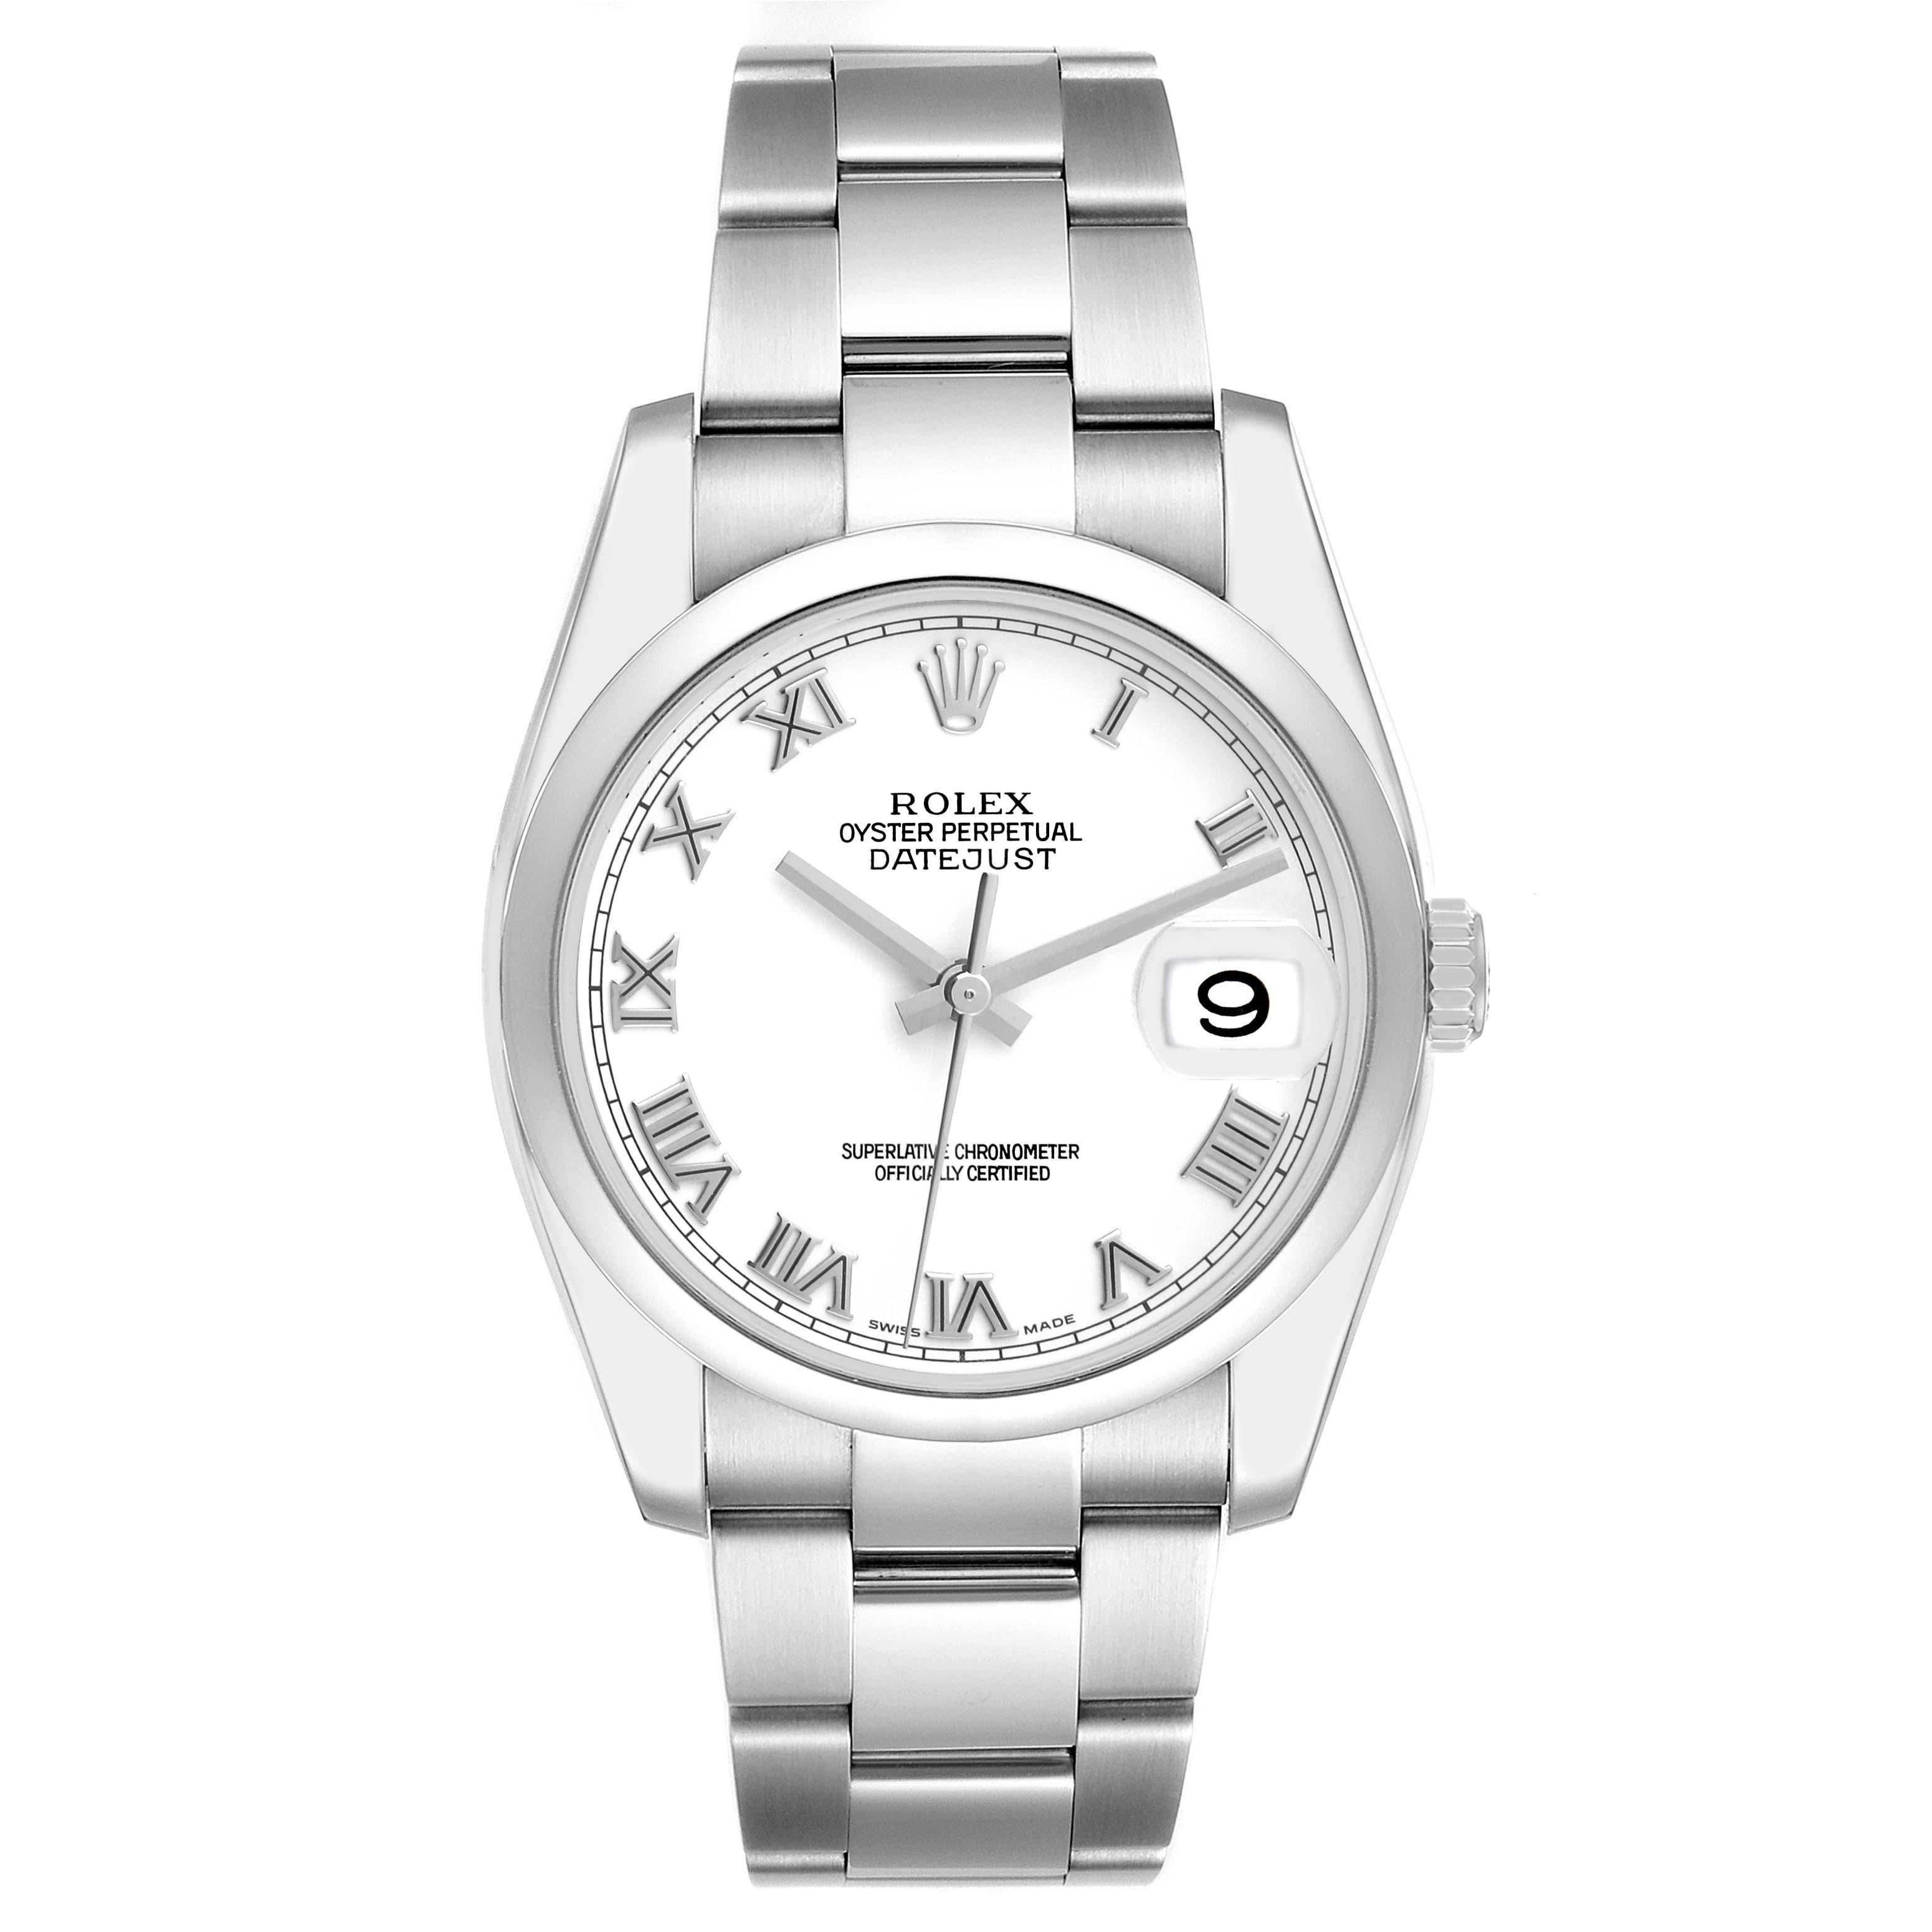 Rolex Datejust White Roman Dial Steel Mens Watch 116200 Box Card For Sale 5